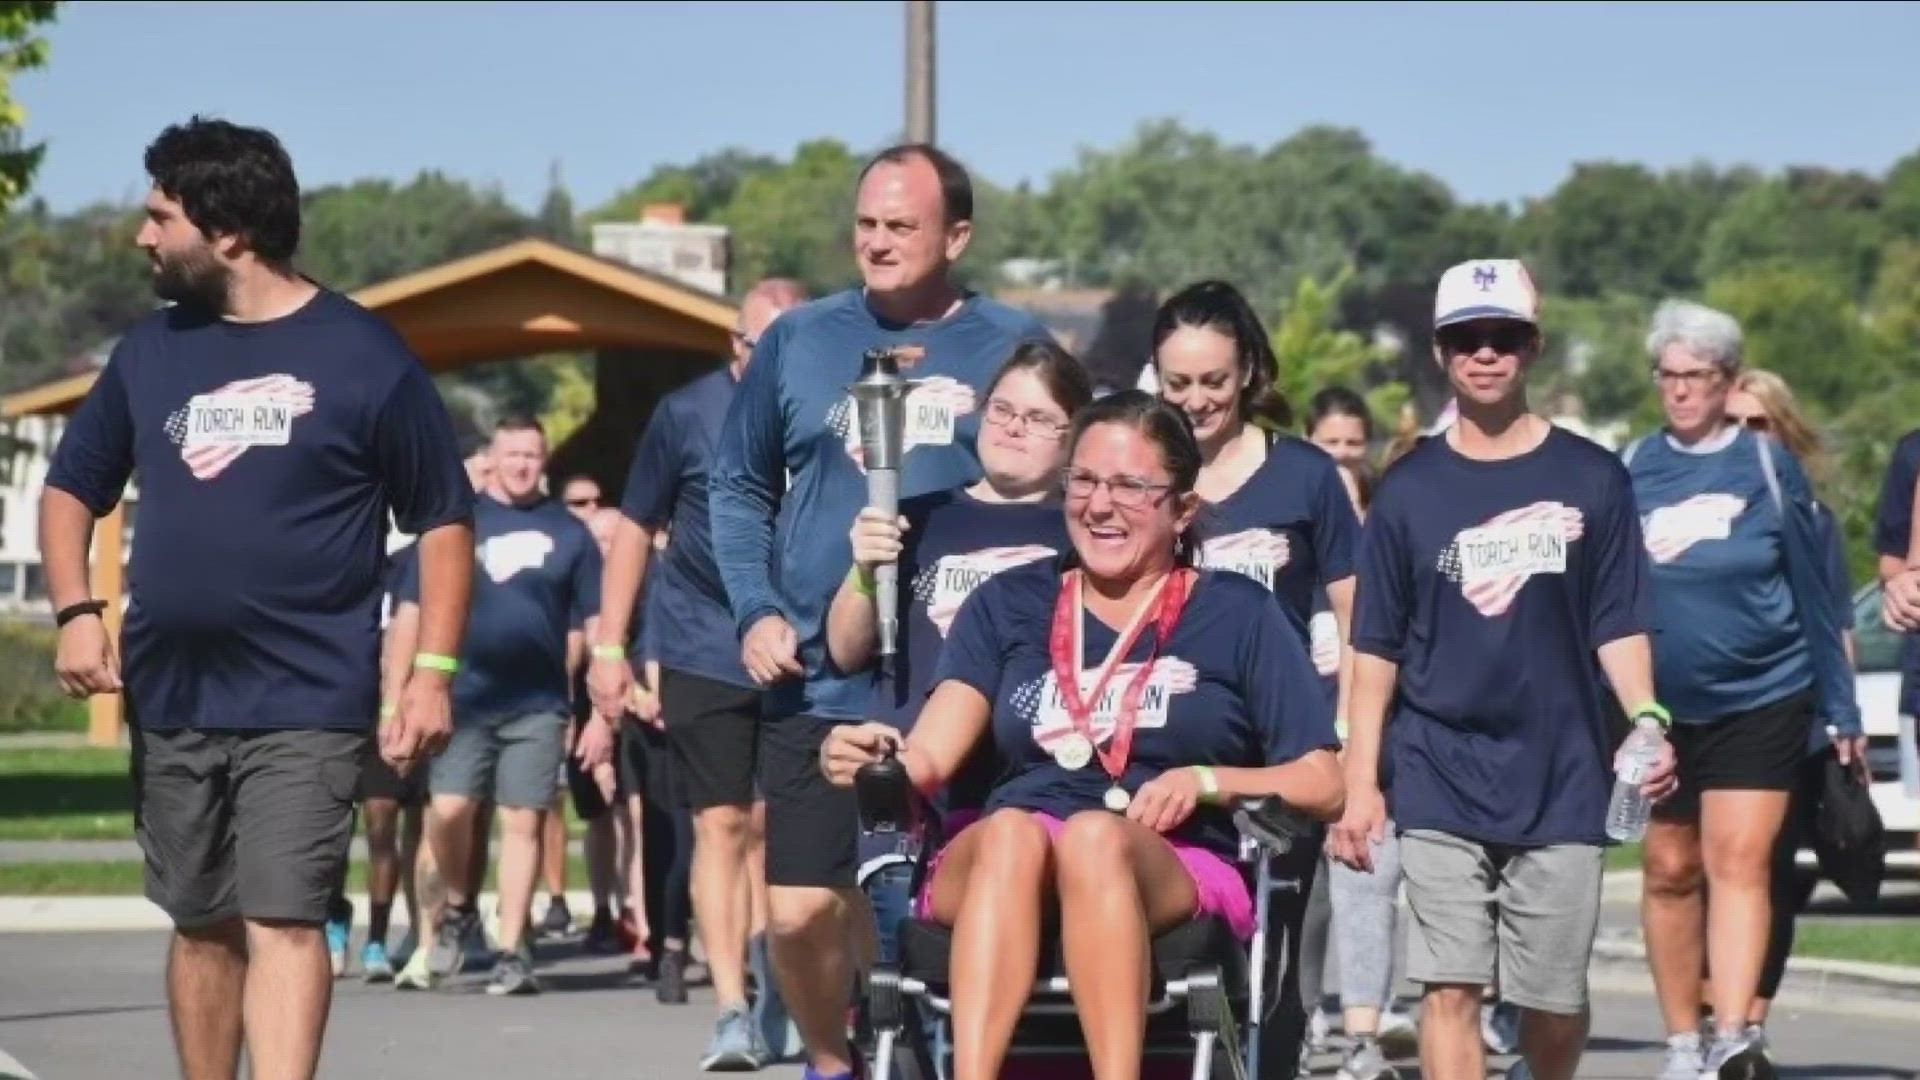 Jeff Wilson is retired from the Border Patrol and will join 89 members of law enforcement in the final leg of the Law Enforcement Torch Run in Germany.